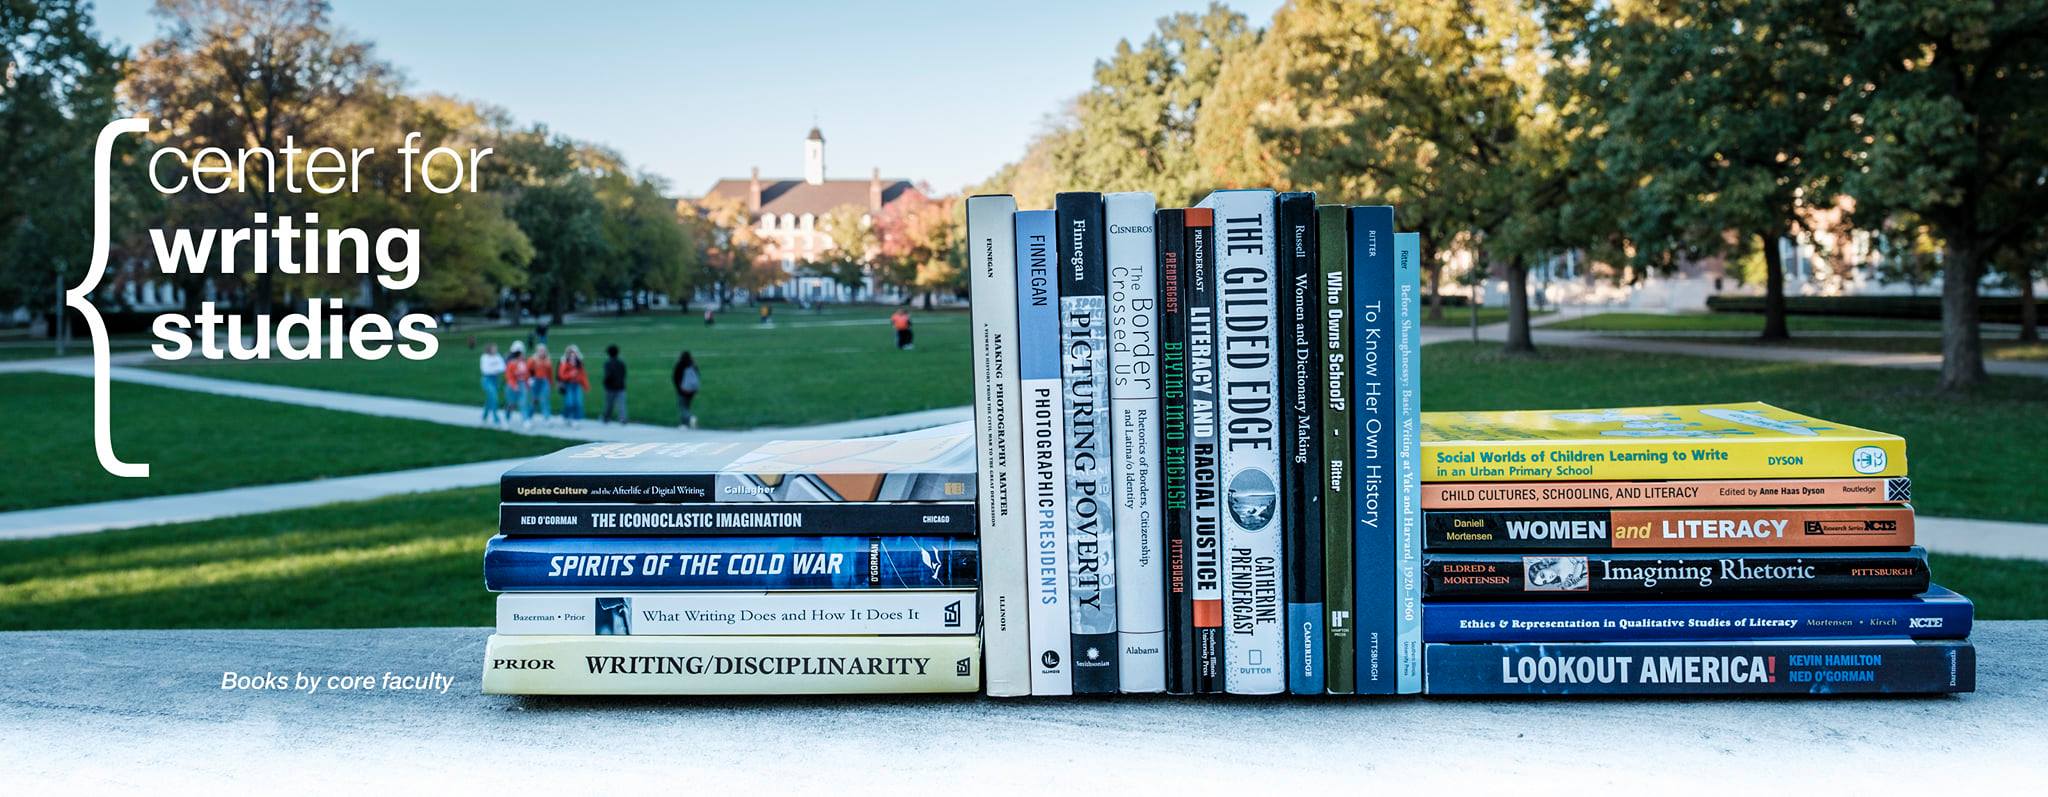 Banner image depicting a view UIUC quad from Foellinger Auditorium in the background, with students walking by. In the foreground, a stack of books by Center for Writing Studies faculty is visible, half propped up vertically by surrounding horizontal stacks. The caption reads "books by core faculty." The Center for Writing Studies logo is visible in the upper left: a large brace bracket that surrounds white text, "center for writing studies."